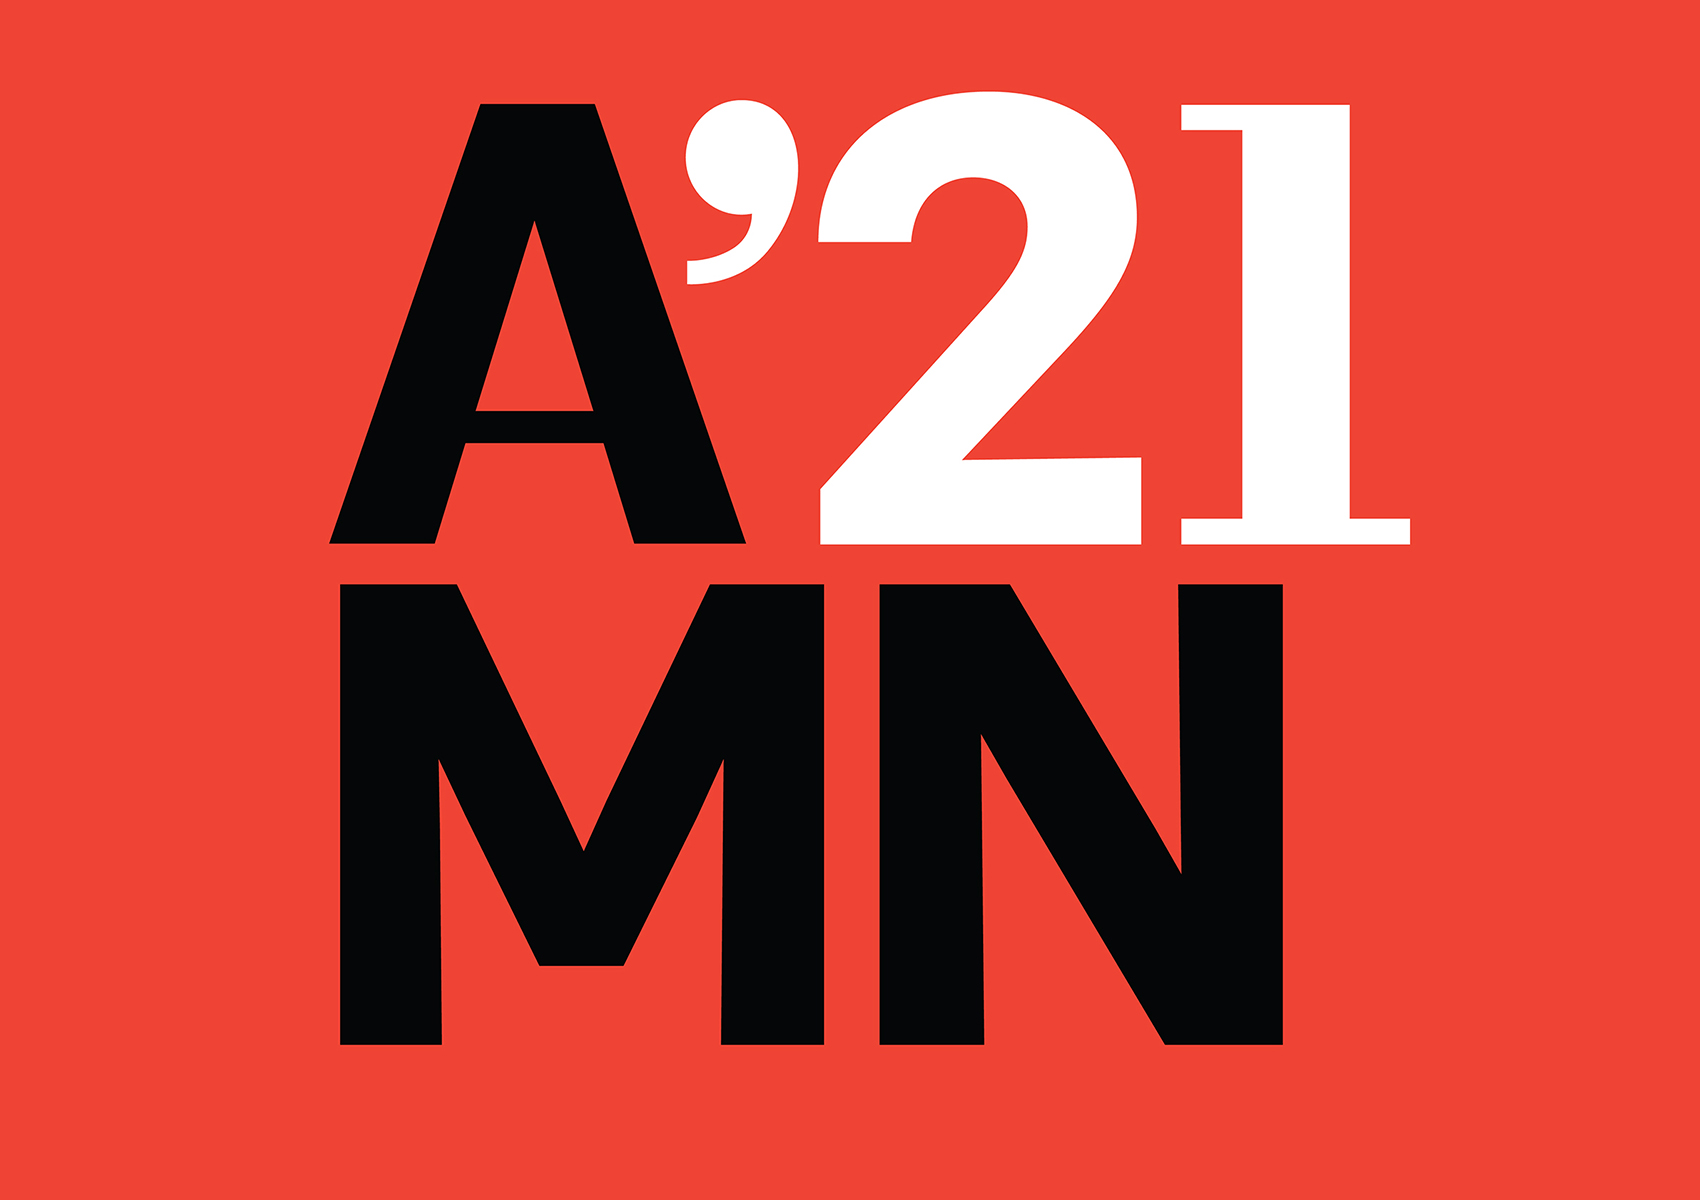 A’21 MN – The Minnesota Conference on Architecture: Day 2